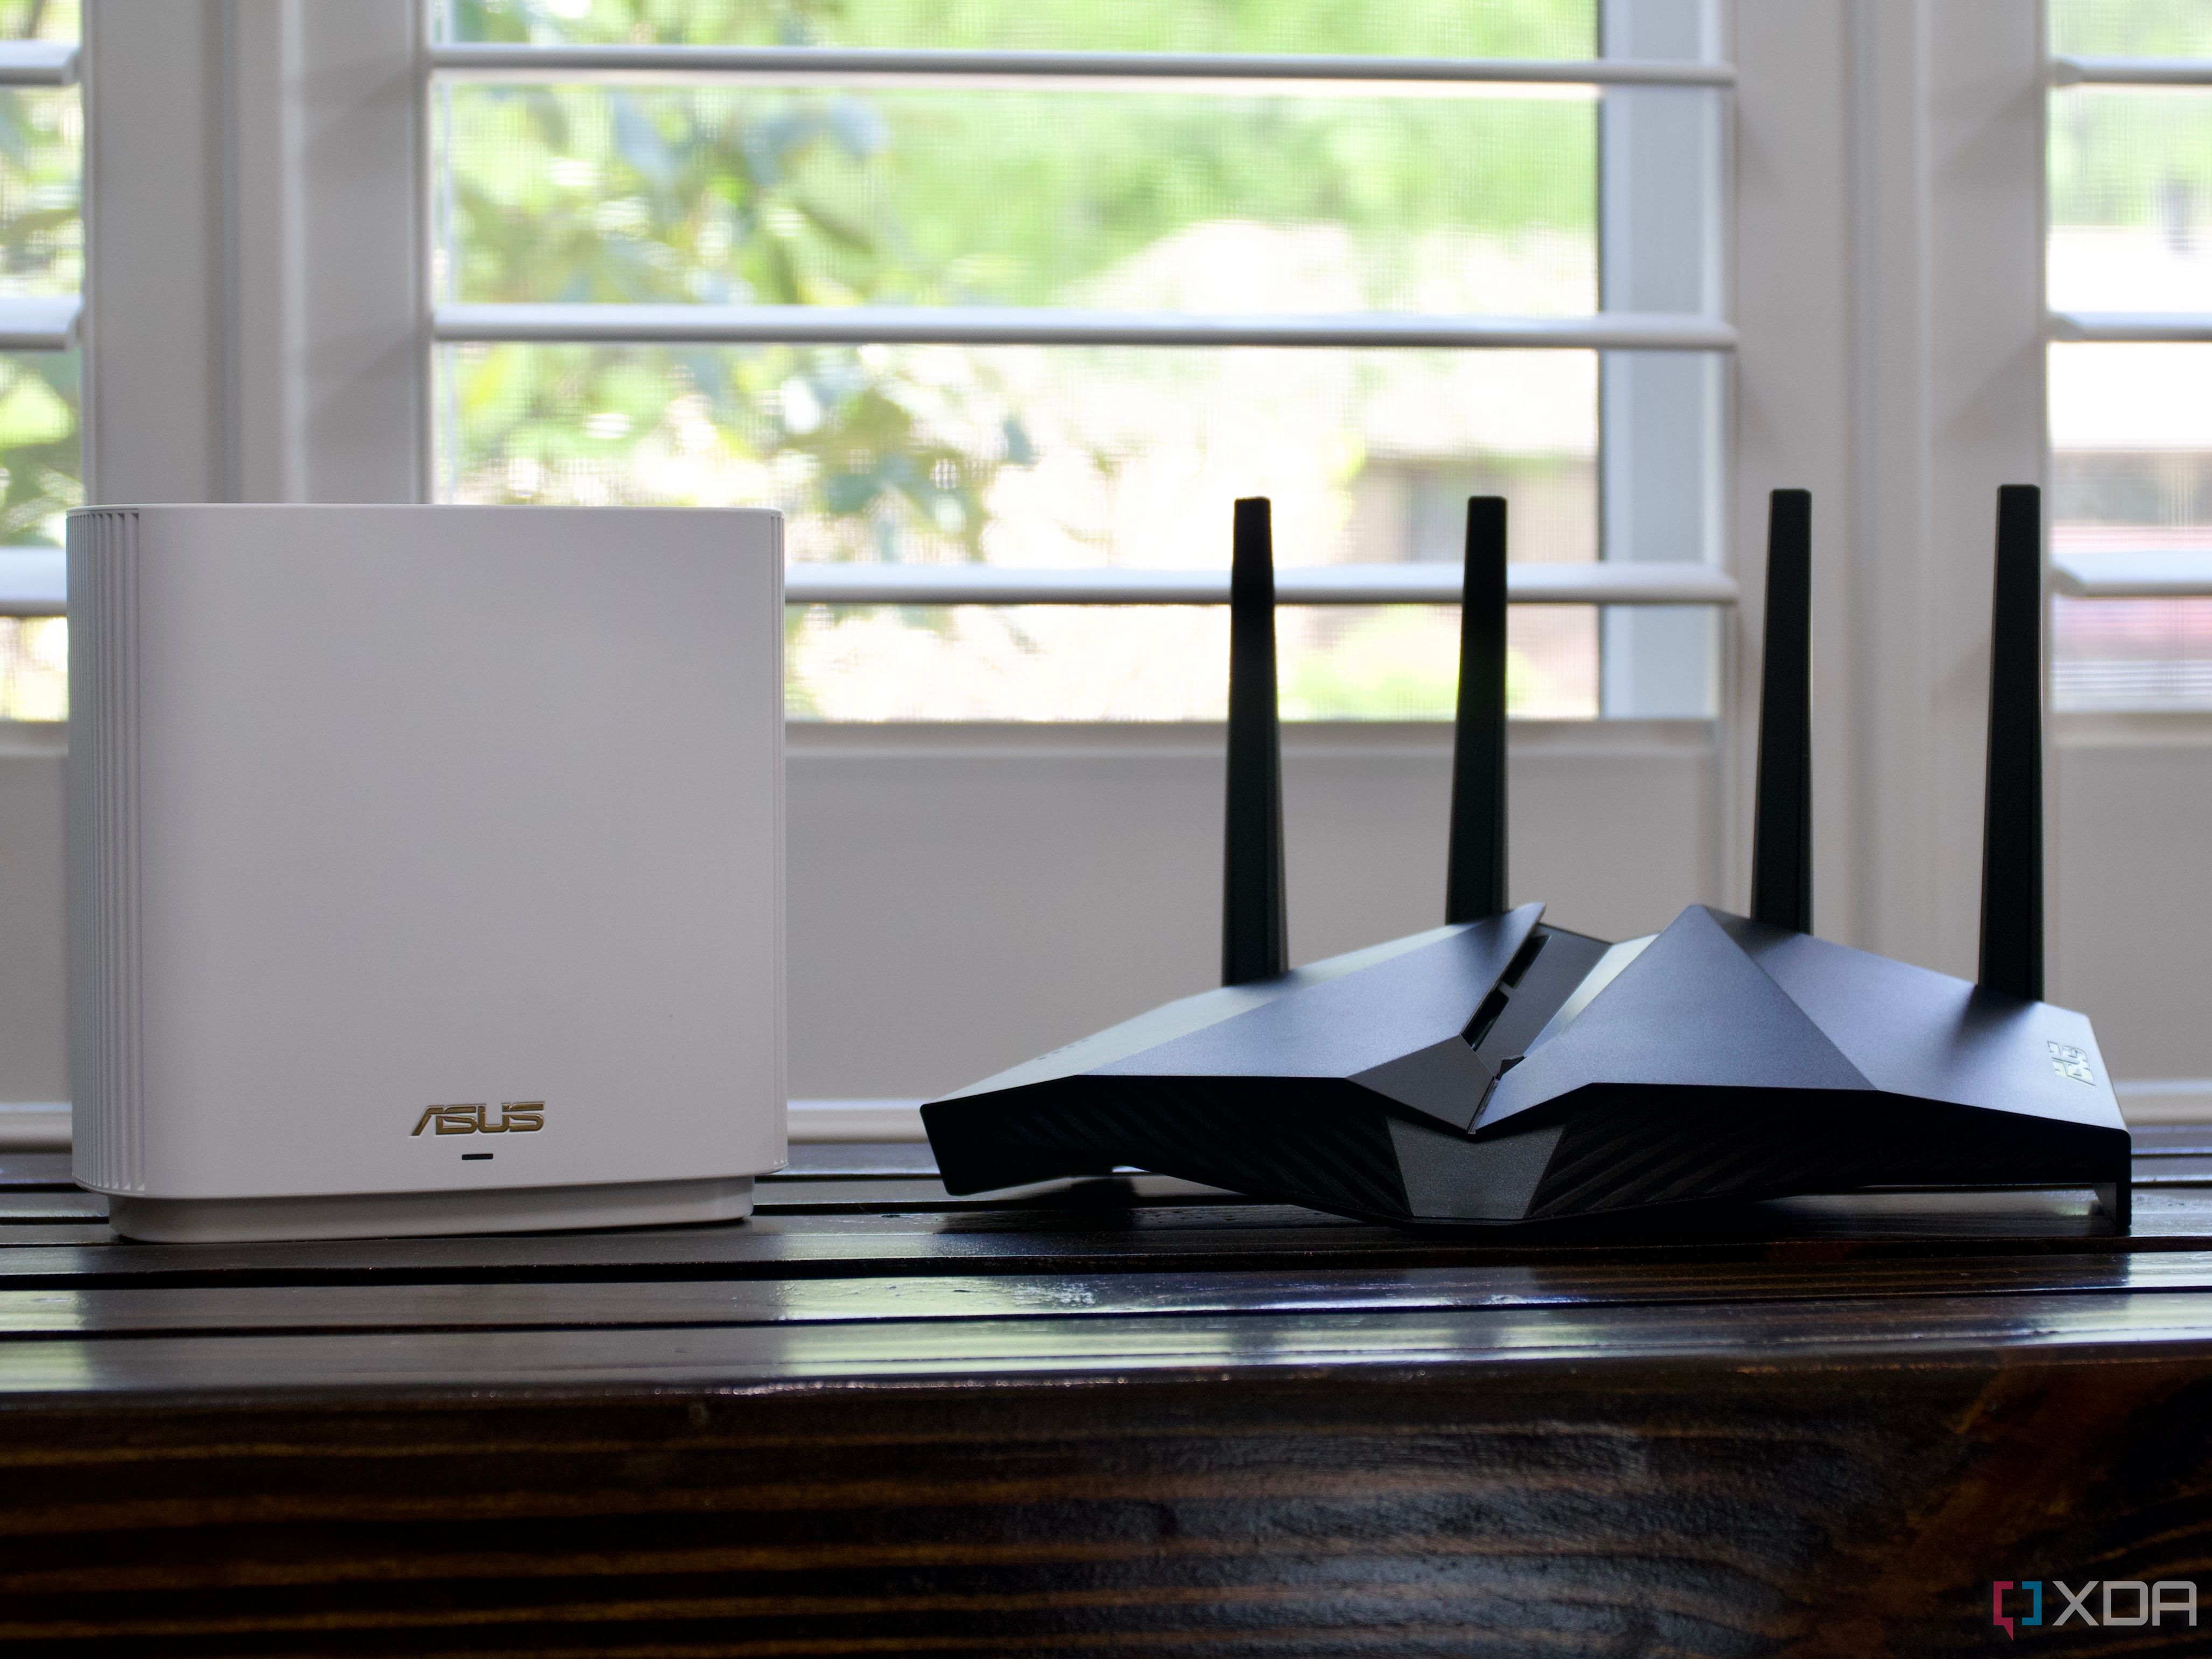 The best mesh WiFi routers for gamers - Wifi/Routers